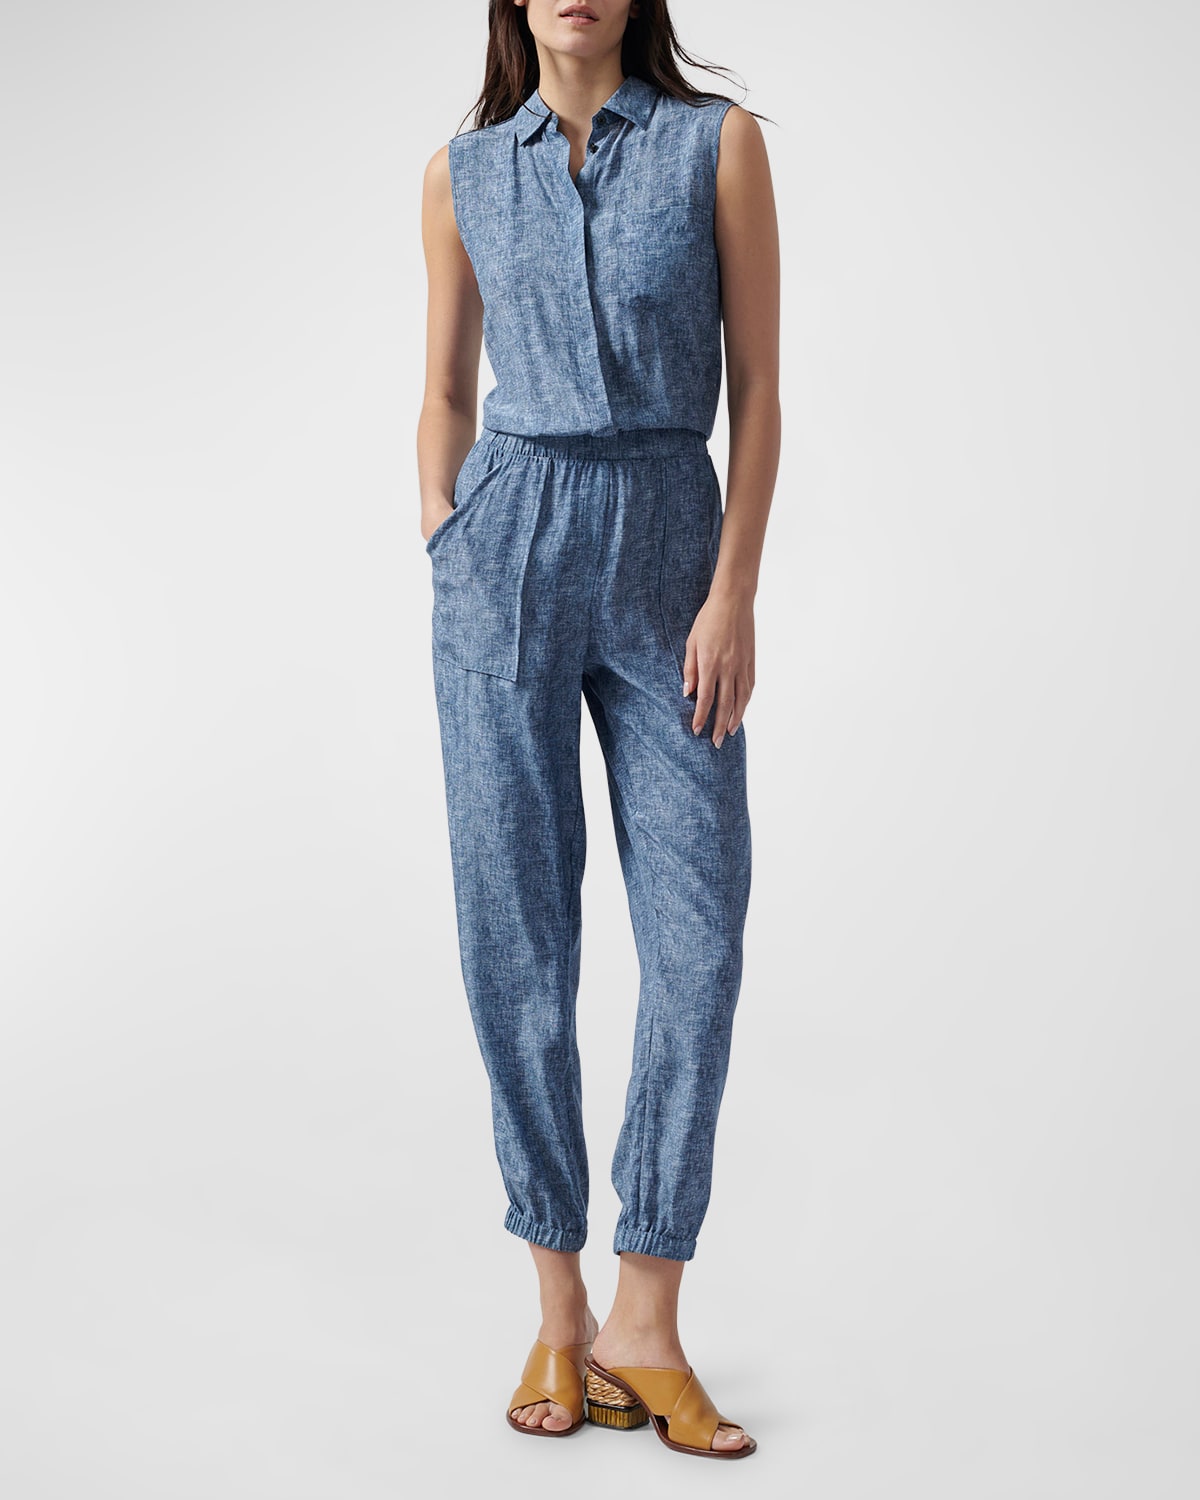 Atm Anthony Thomas Melillo Sleeveless Silk Jumpsuit In Naval Blue Combo